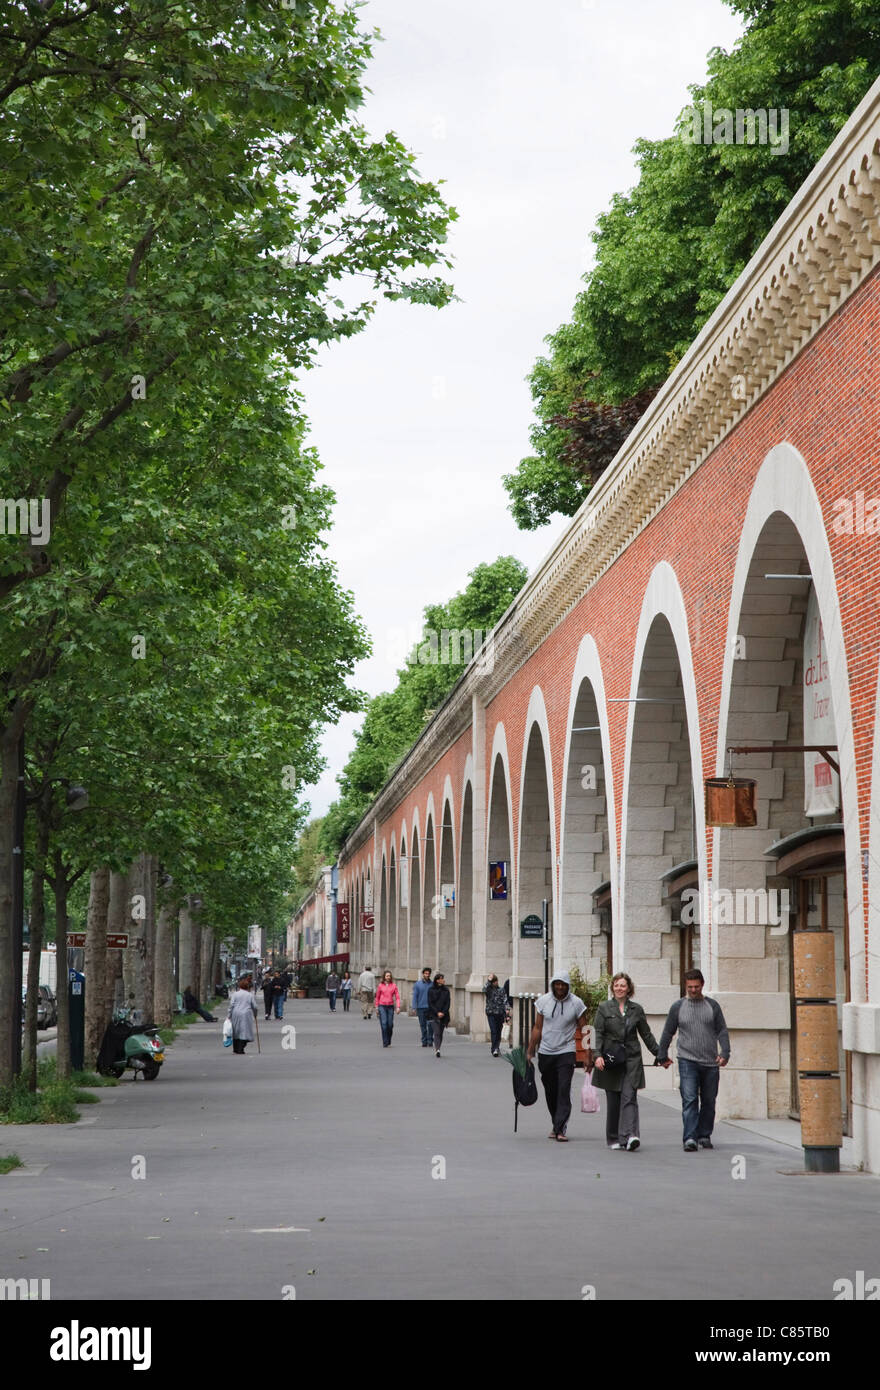 Le Viaduc des Arts, a former railway viaduct in Paris is now a garden walkway with galleries in its arches. Stock Photo